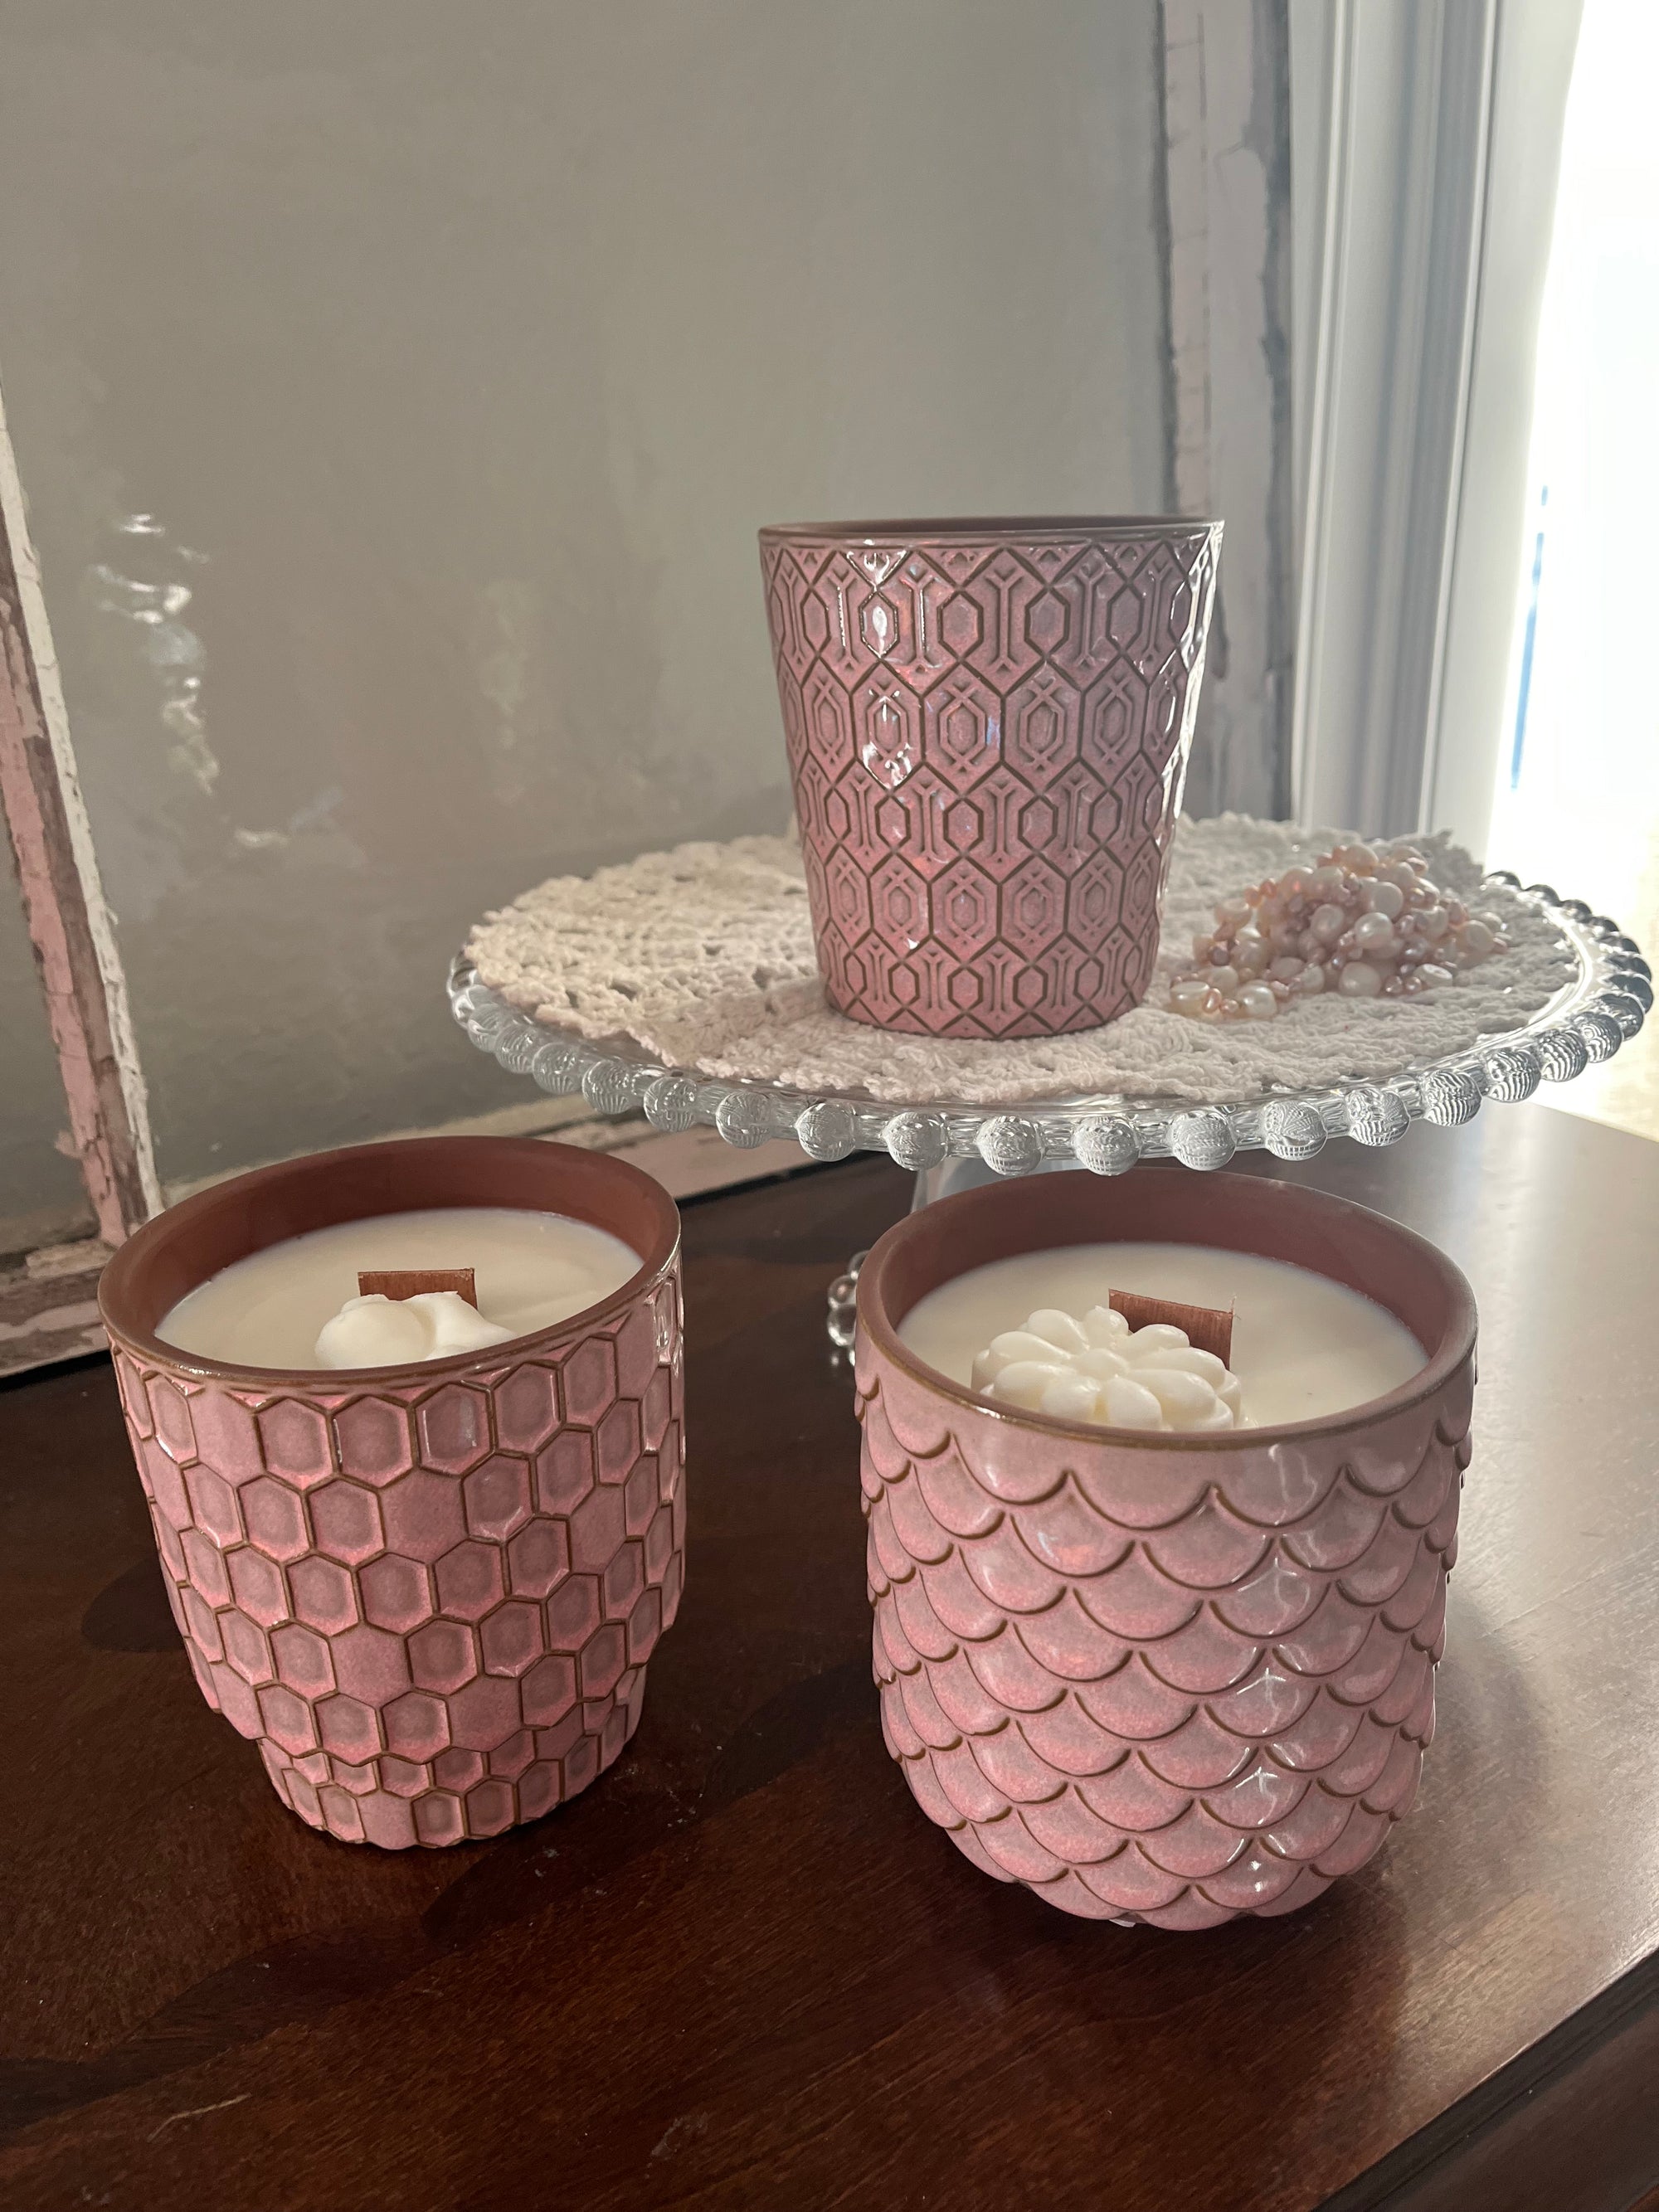 Summertime Wood Wick Candle - Pink Base, Honeycomb Design